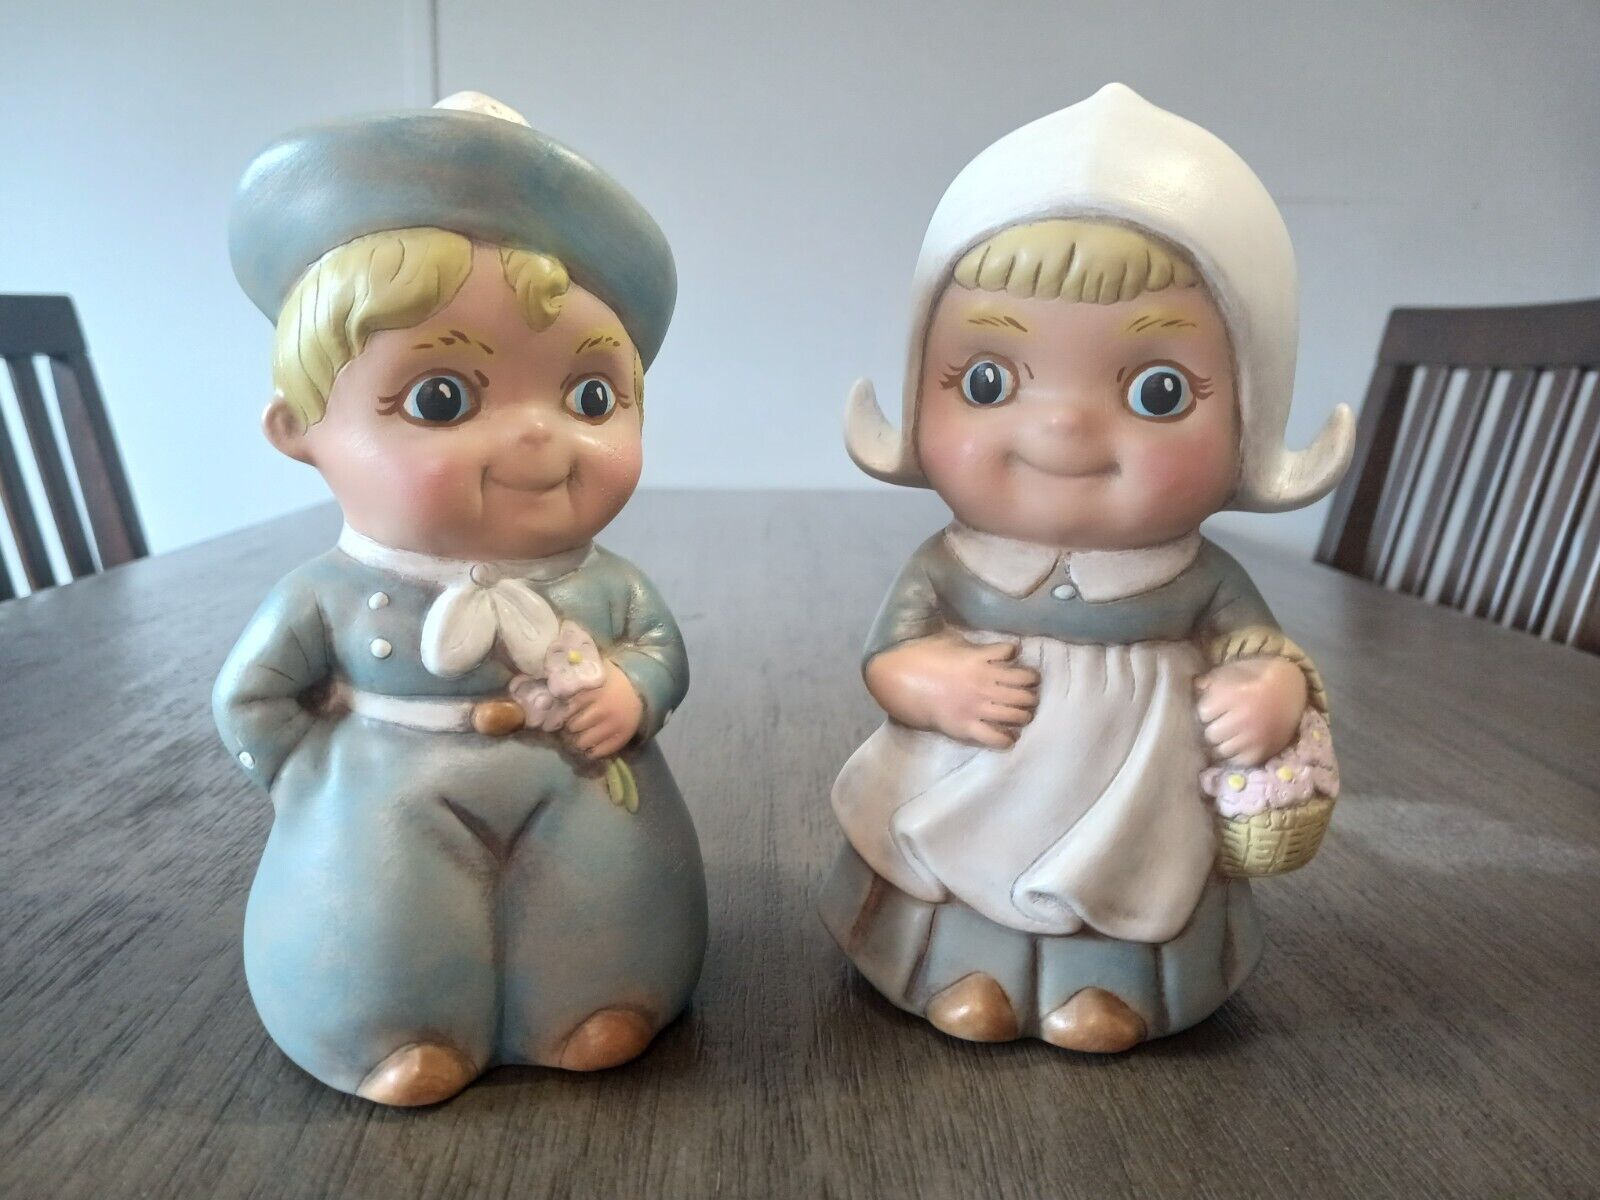 Vintage Hand Painted Ceramic Dutch Boy & Girl 1980 Initialed WK